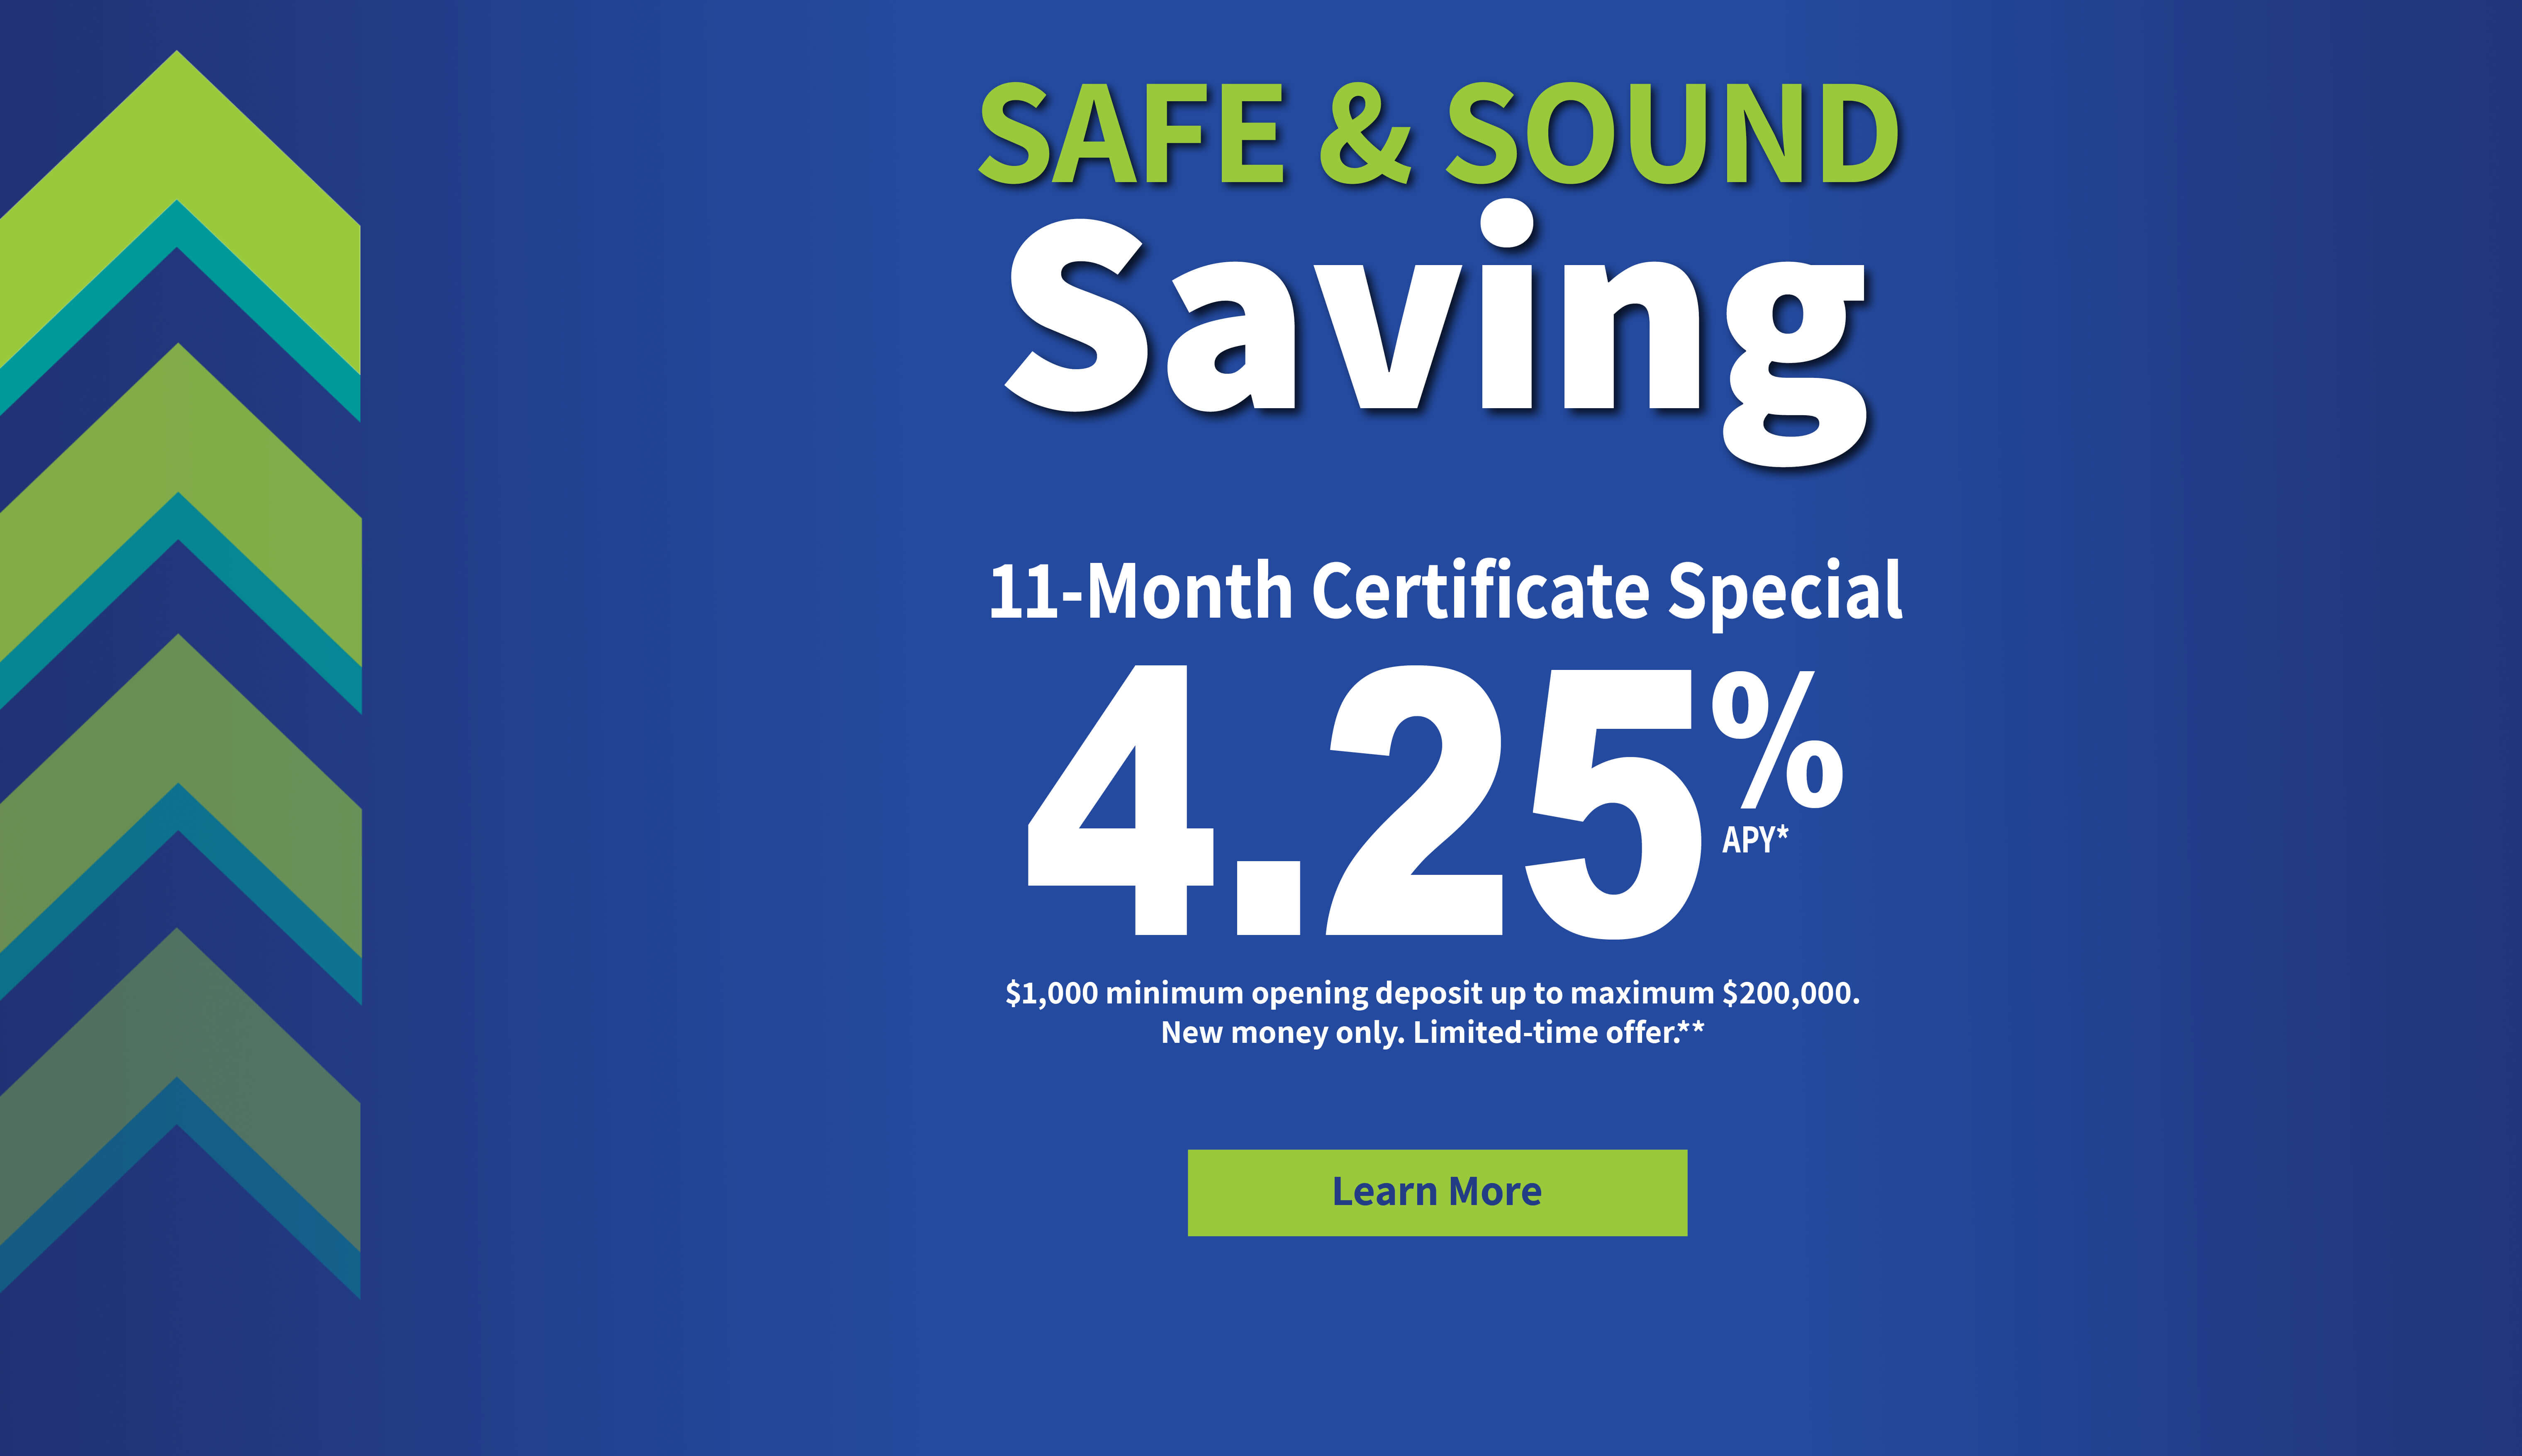 Safe and Sound Saving. 11-month Certificate Special 4.25% APY. $1,000 minimum deposit and $200,000 maximum. New money only. Limited-time offer. 